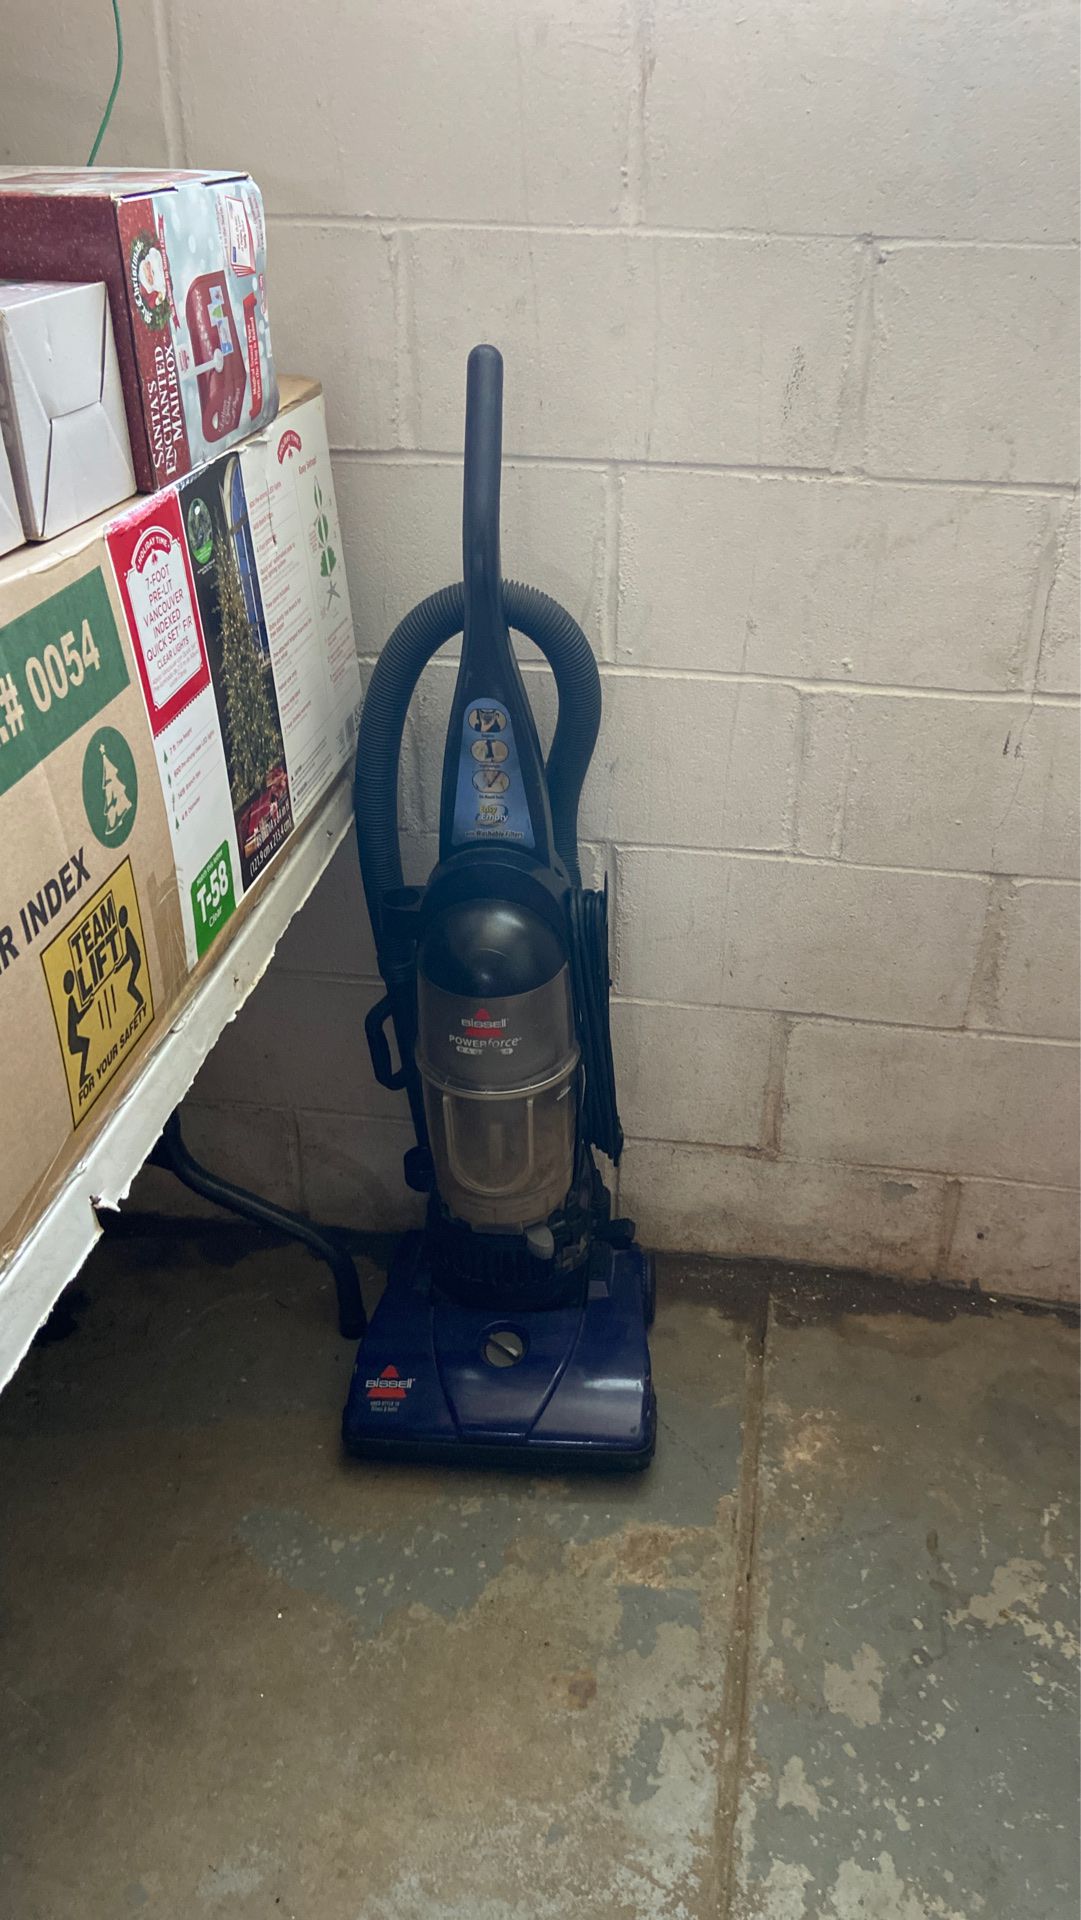 Boswell vacuum works great